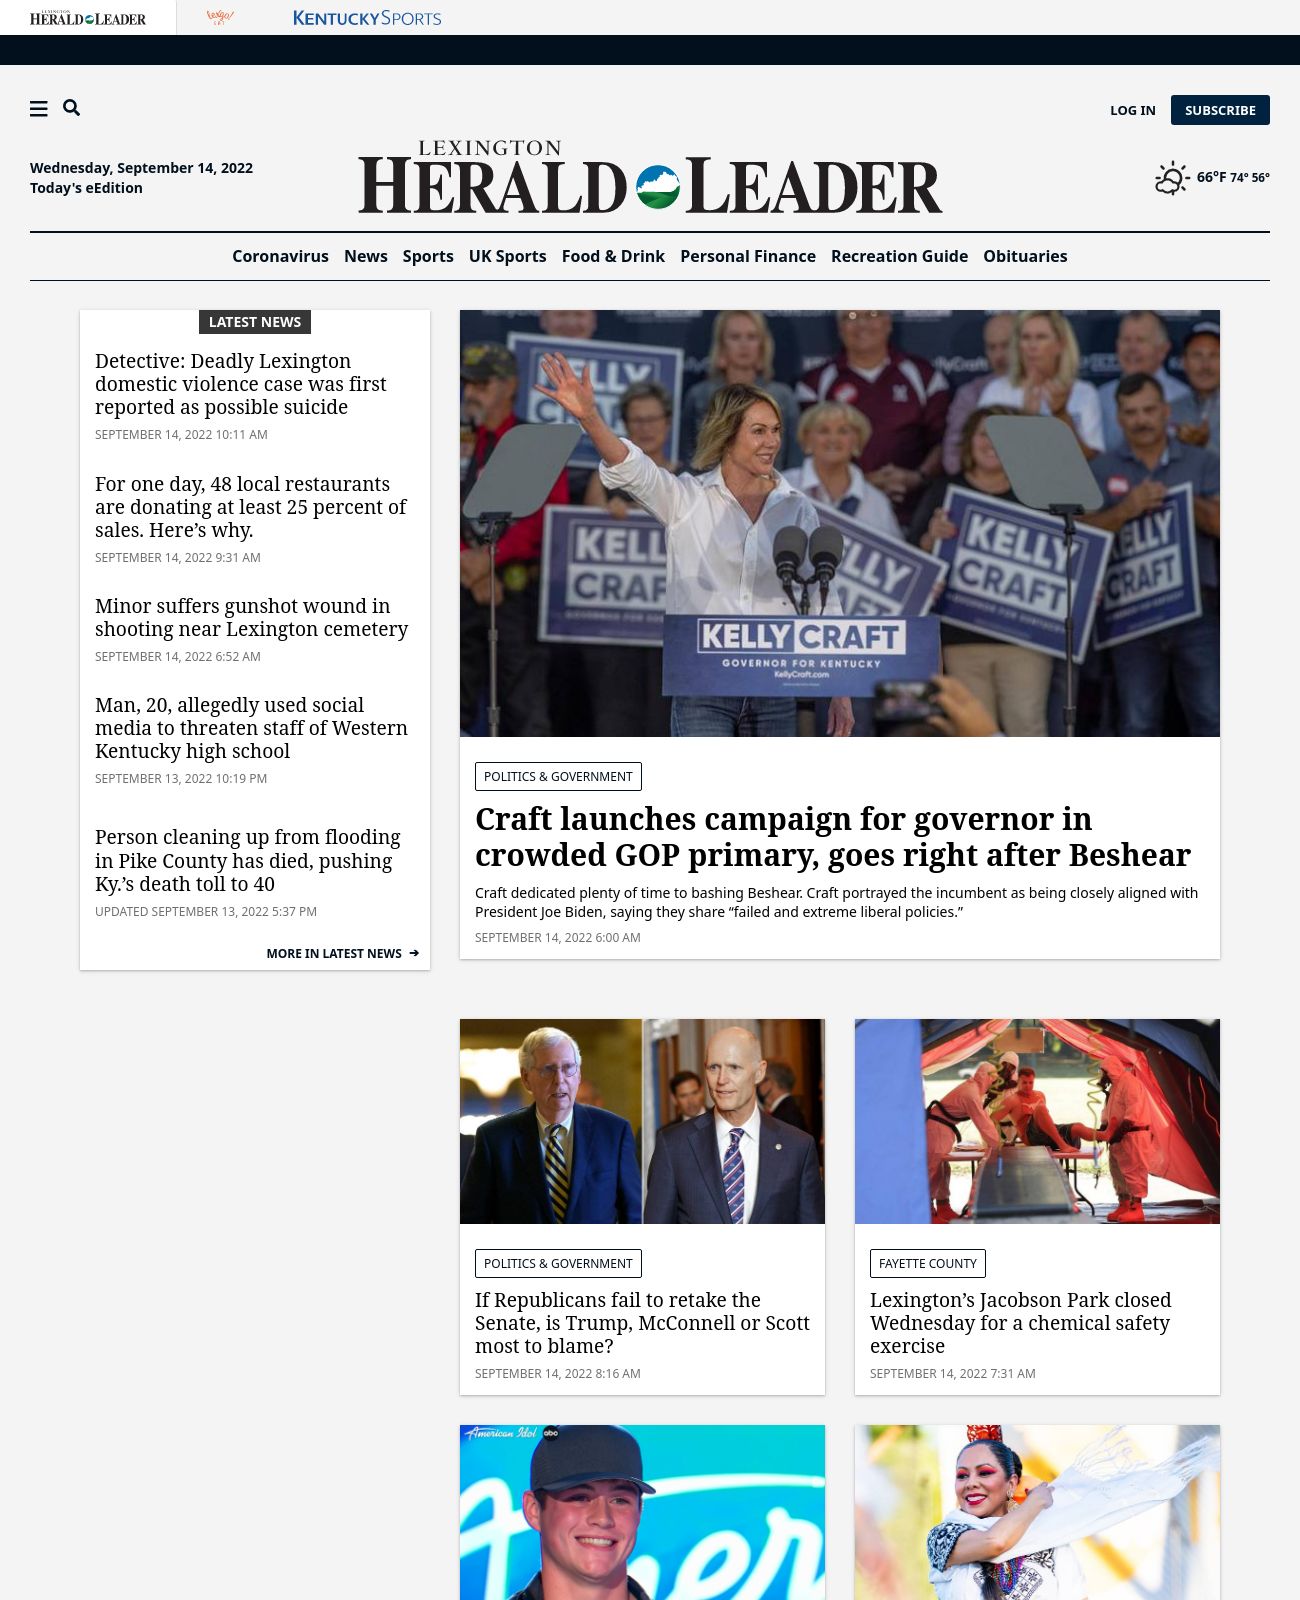 Lexington Herald-Leader at 2022-09-14 11:21:09-04:00 local time